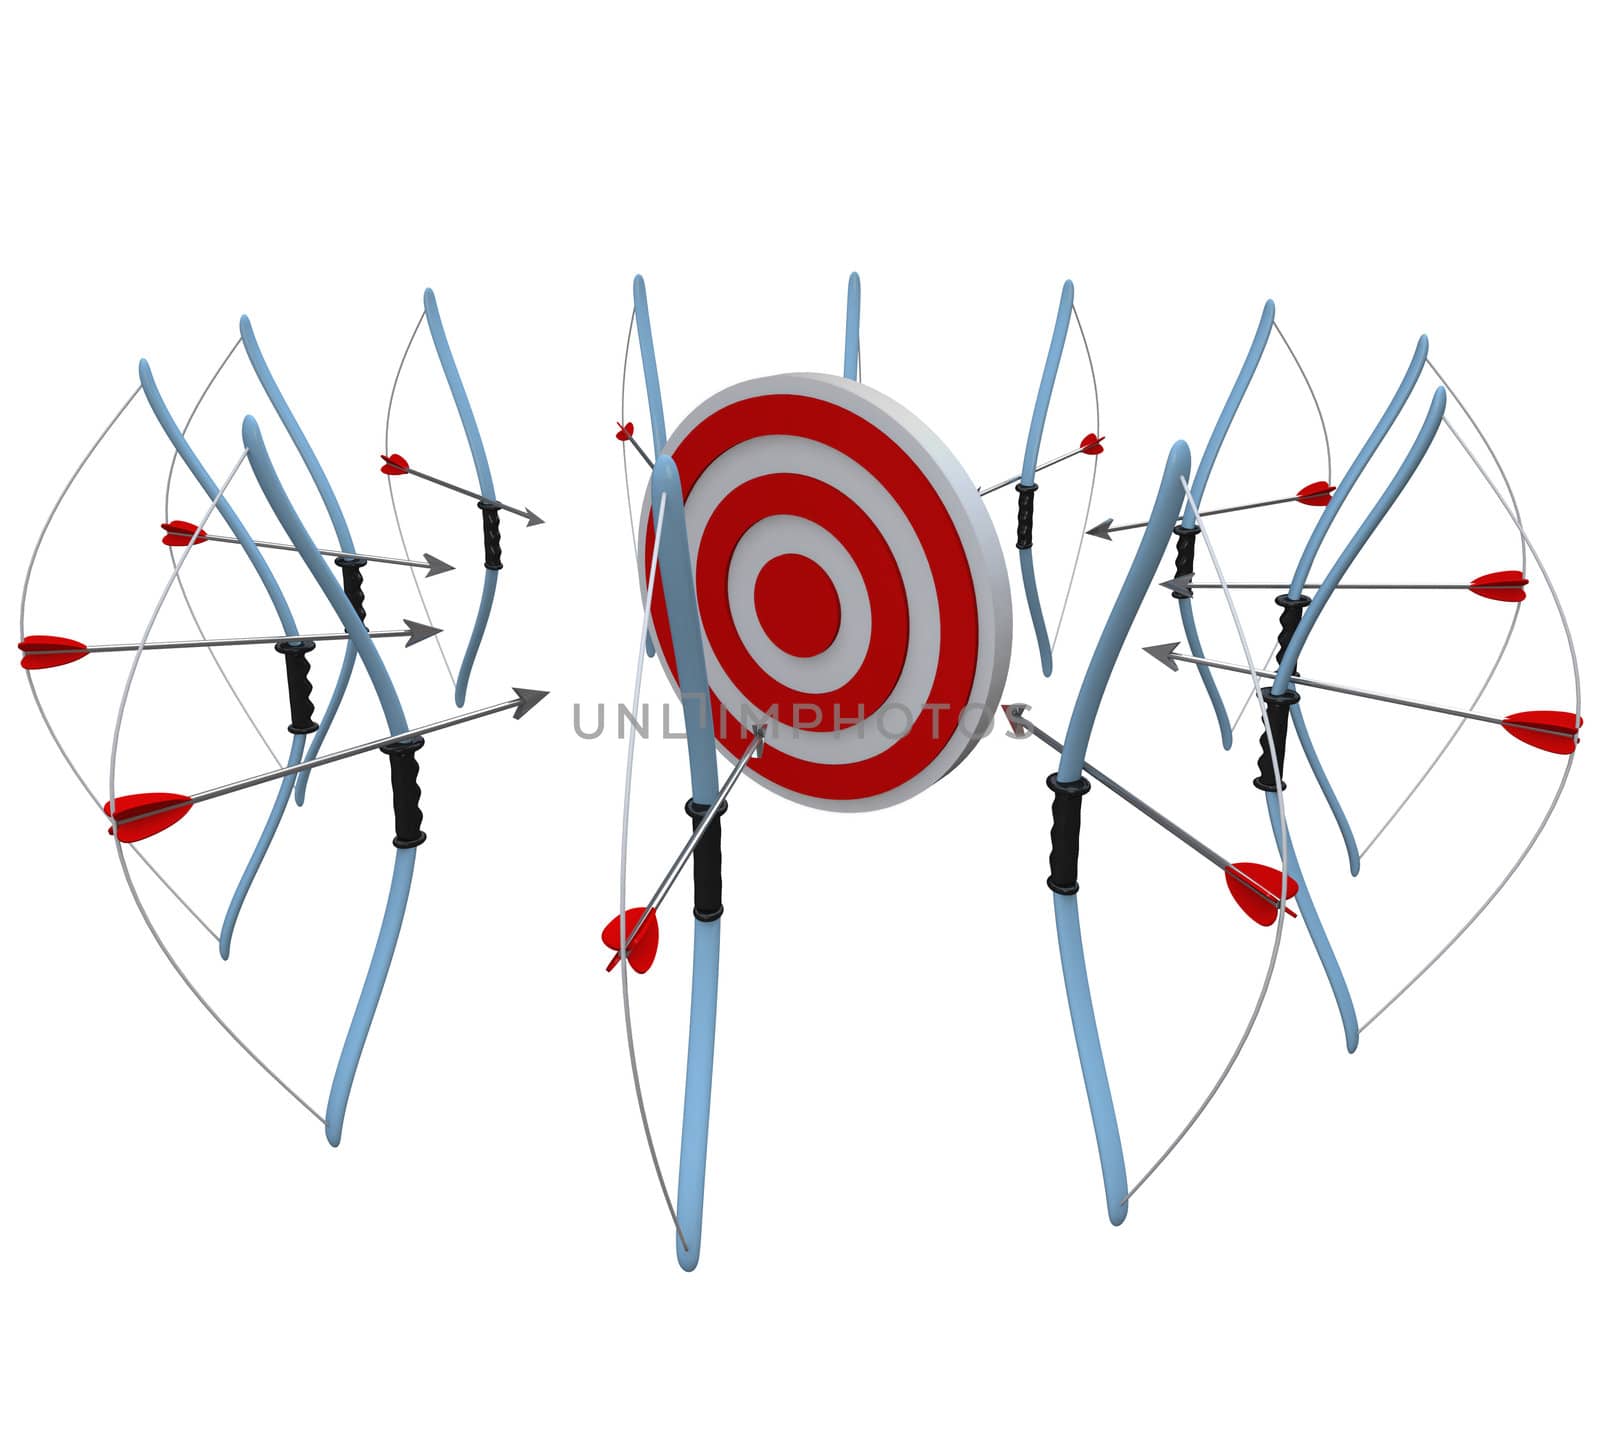 Many Bows and Arrows Aiming at One Target in Competition by iQoncept